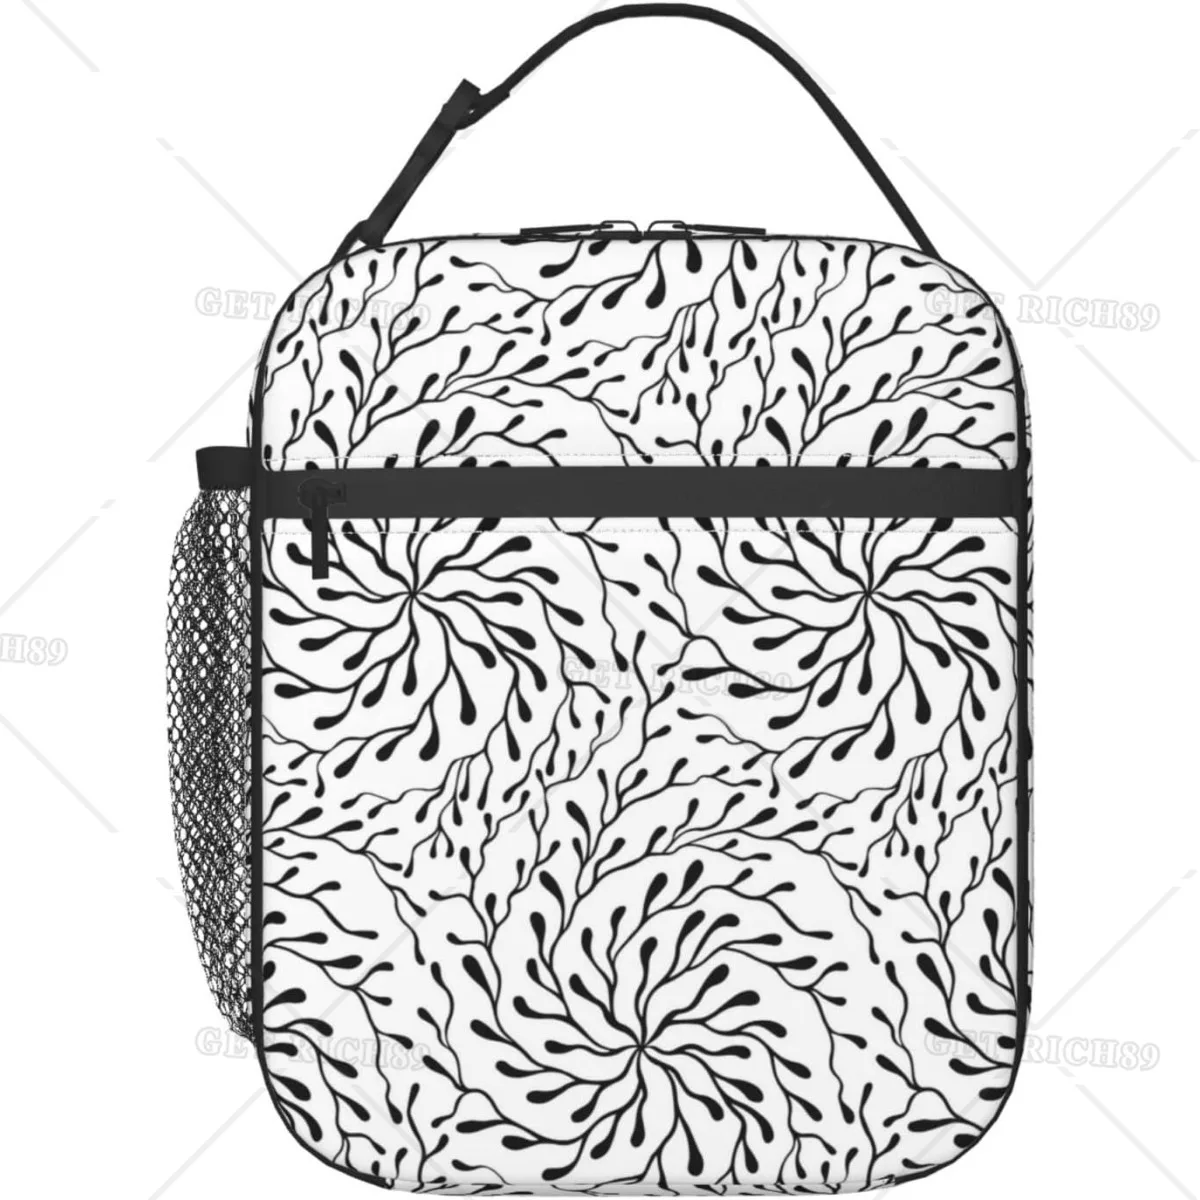 

Hand Drawn Doodle Abstract Black and White Portable Lunch Bag for Women/Men Insulated Reusable Lunch Box for Office Work School